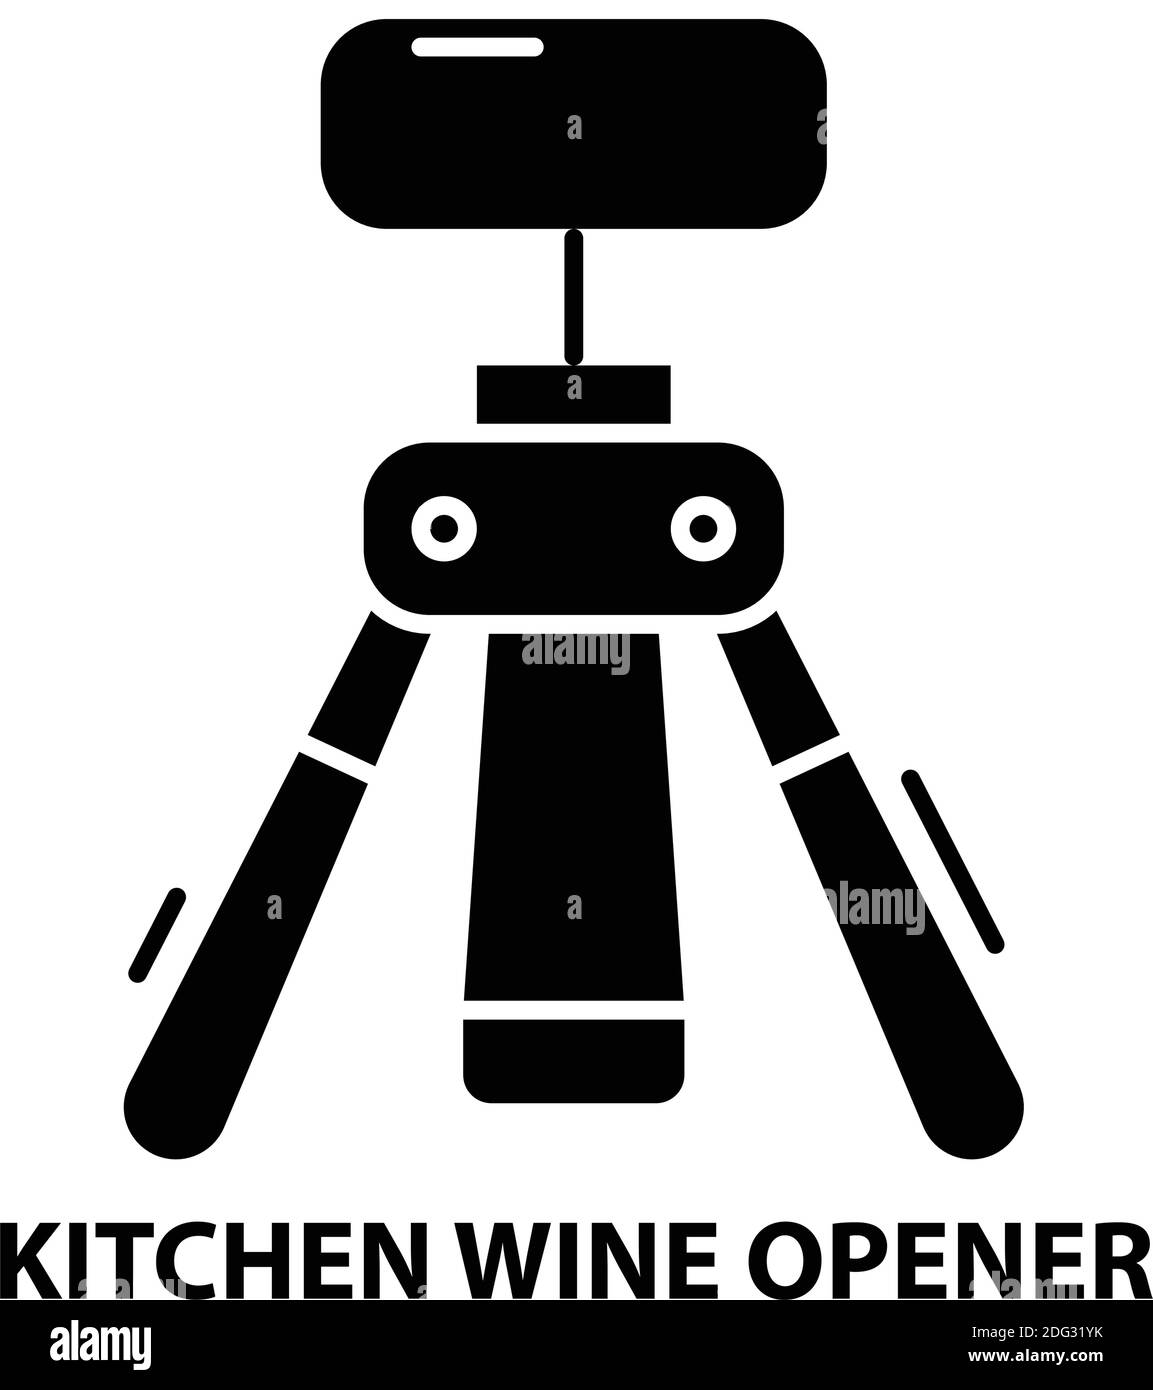 kitchen wine opener icon, black vector sign with editable strokes, concept illustration Stock Vector